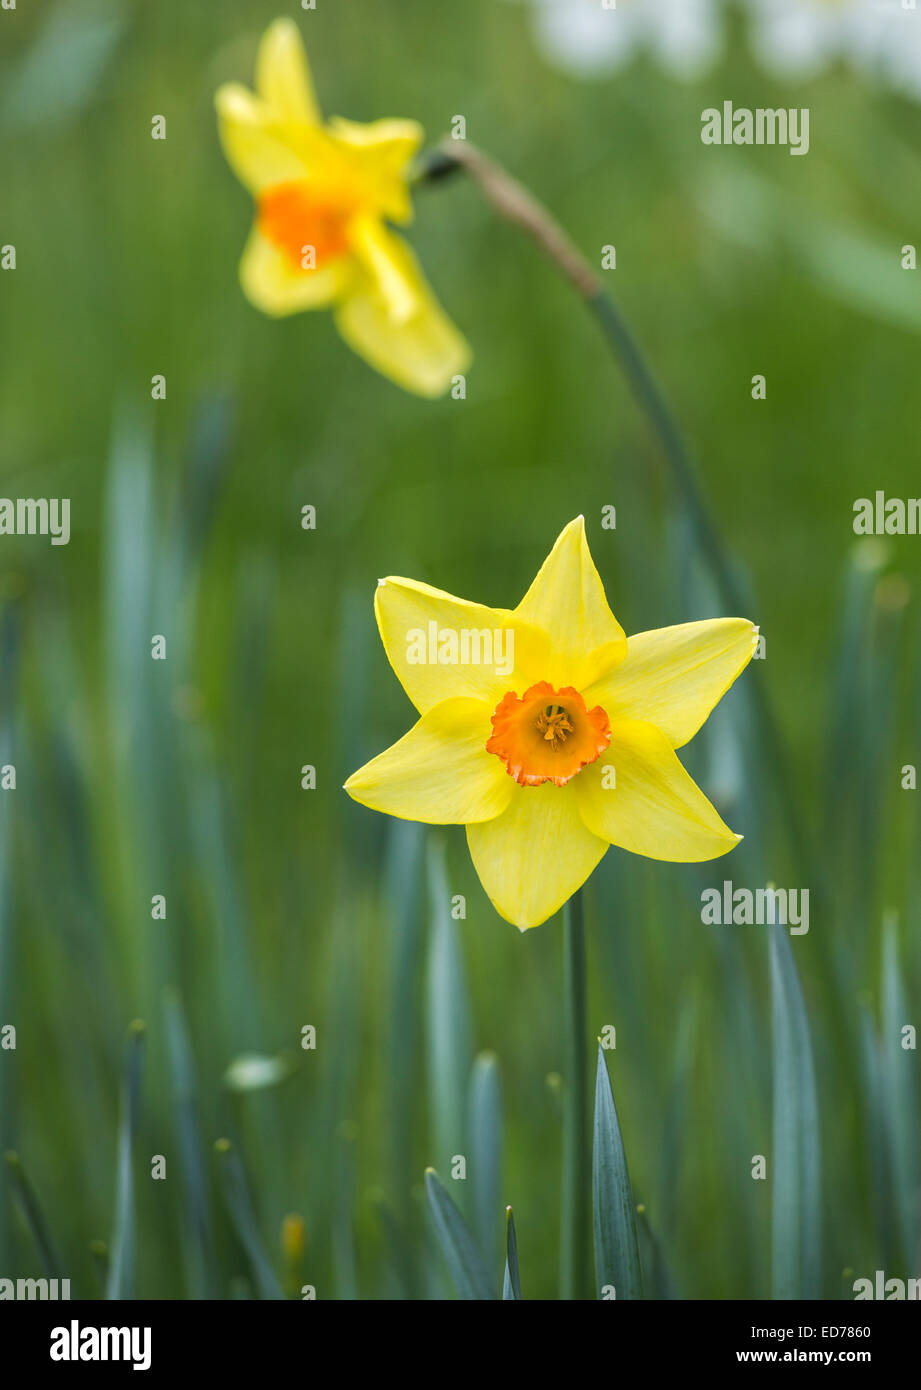 Narcissus 'Scarlet Elegance', yellow petals, large cupped orange corona, at RHS Gardens, Wisley, Surrey, UK in springtime Stock Photo